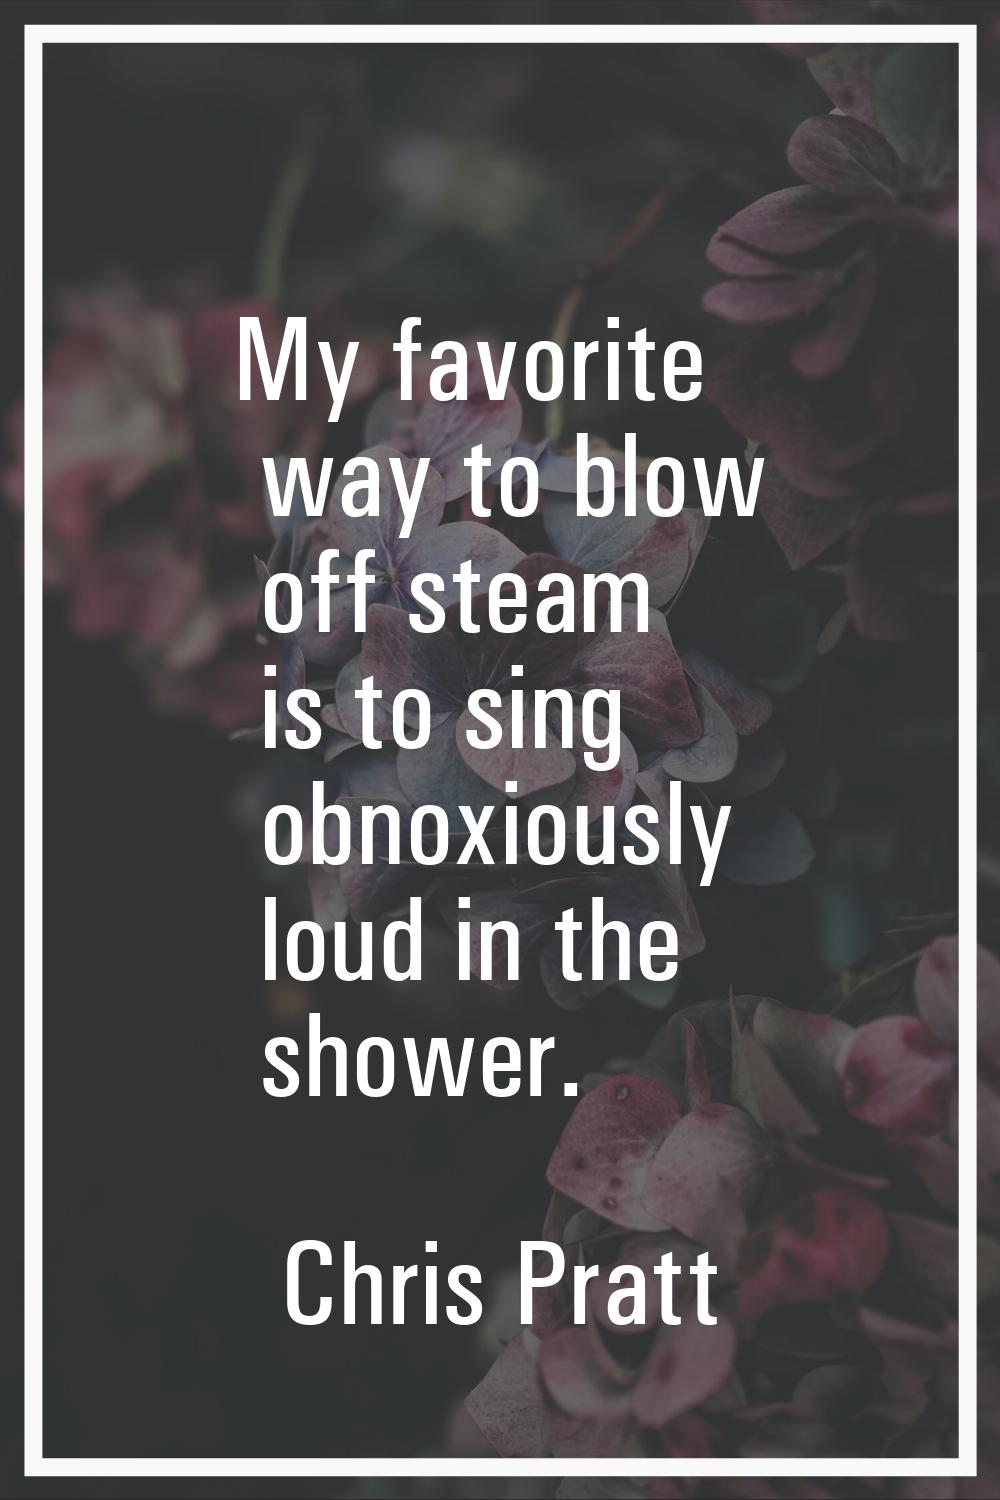 My favorite way to blow off steam is to sing obnoxiously loud in the shower.